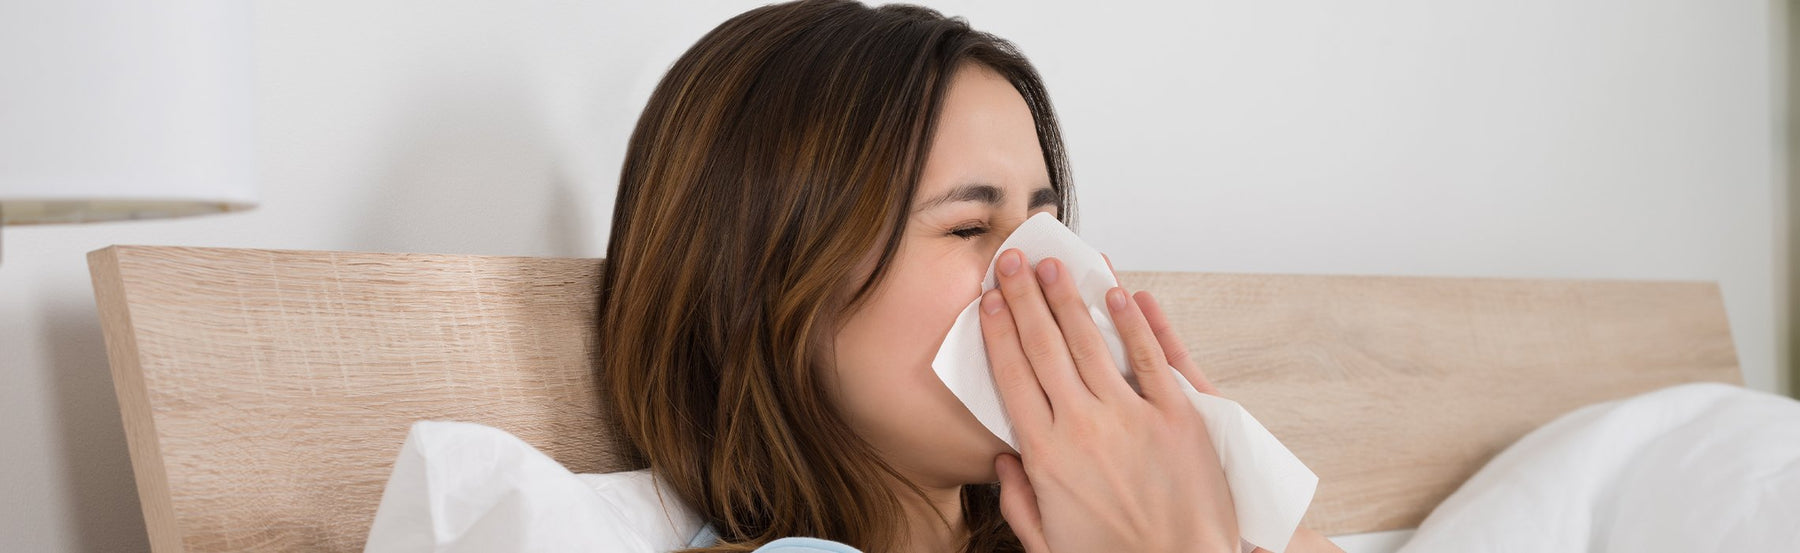 Eight Tips for Fighting Winter Illness